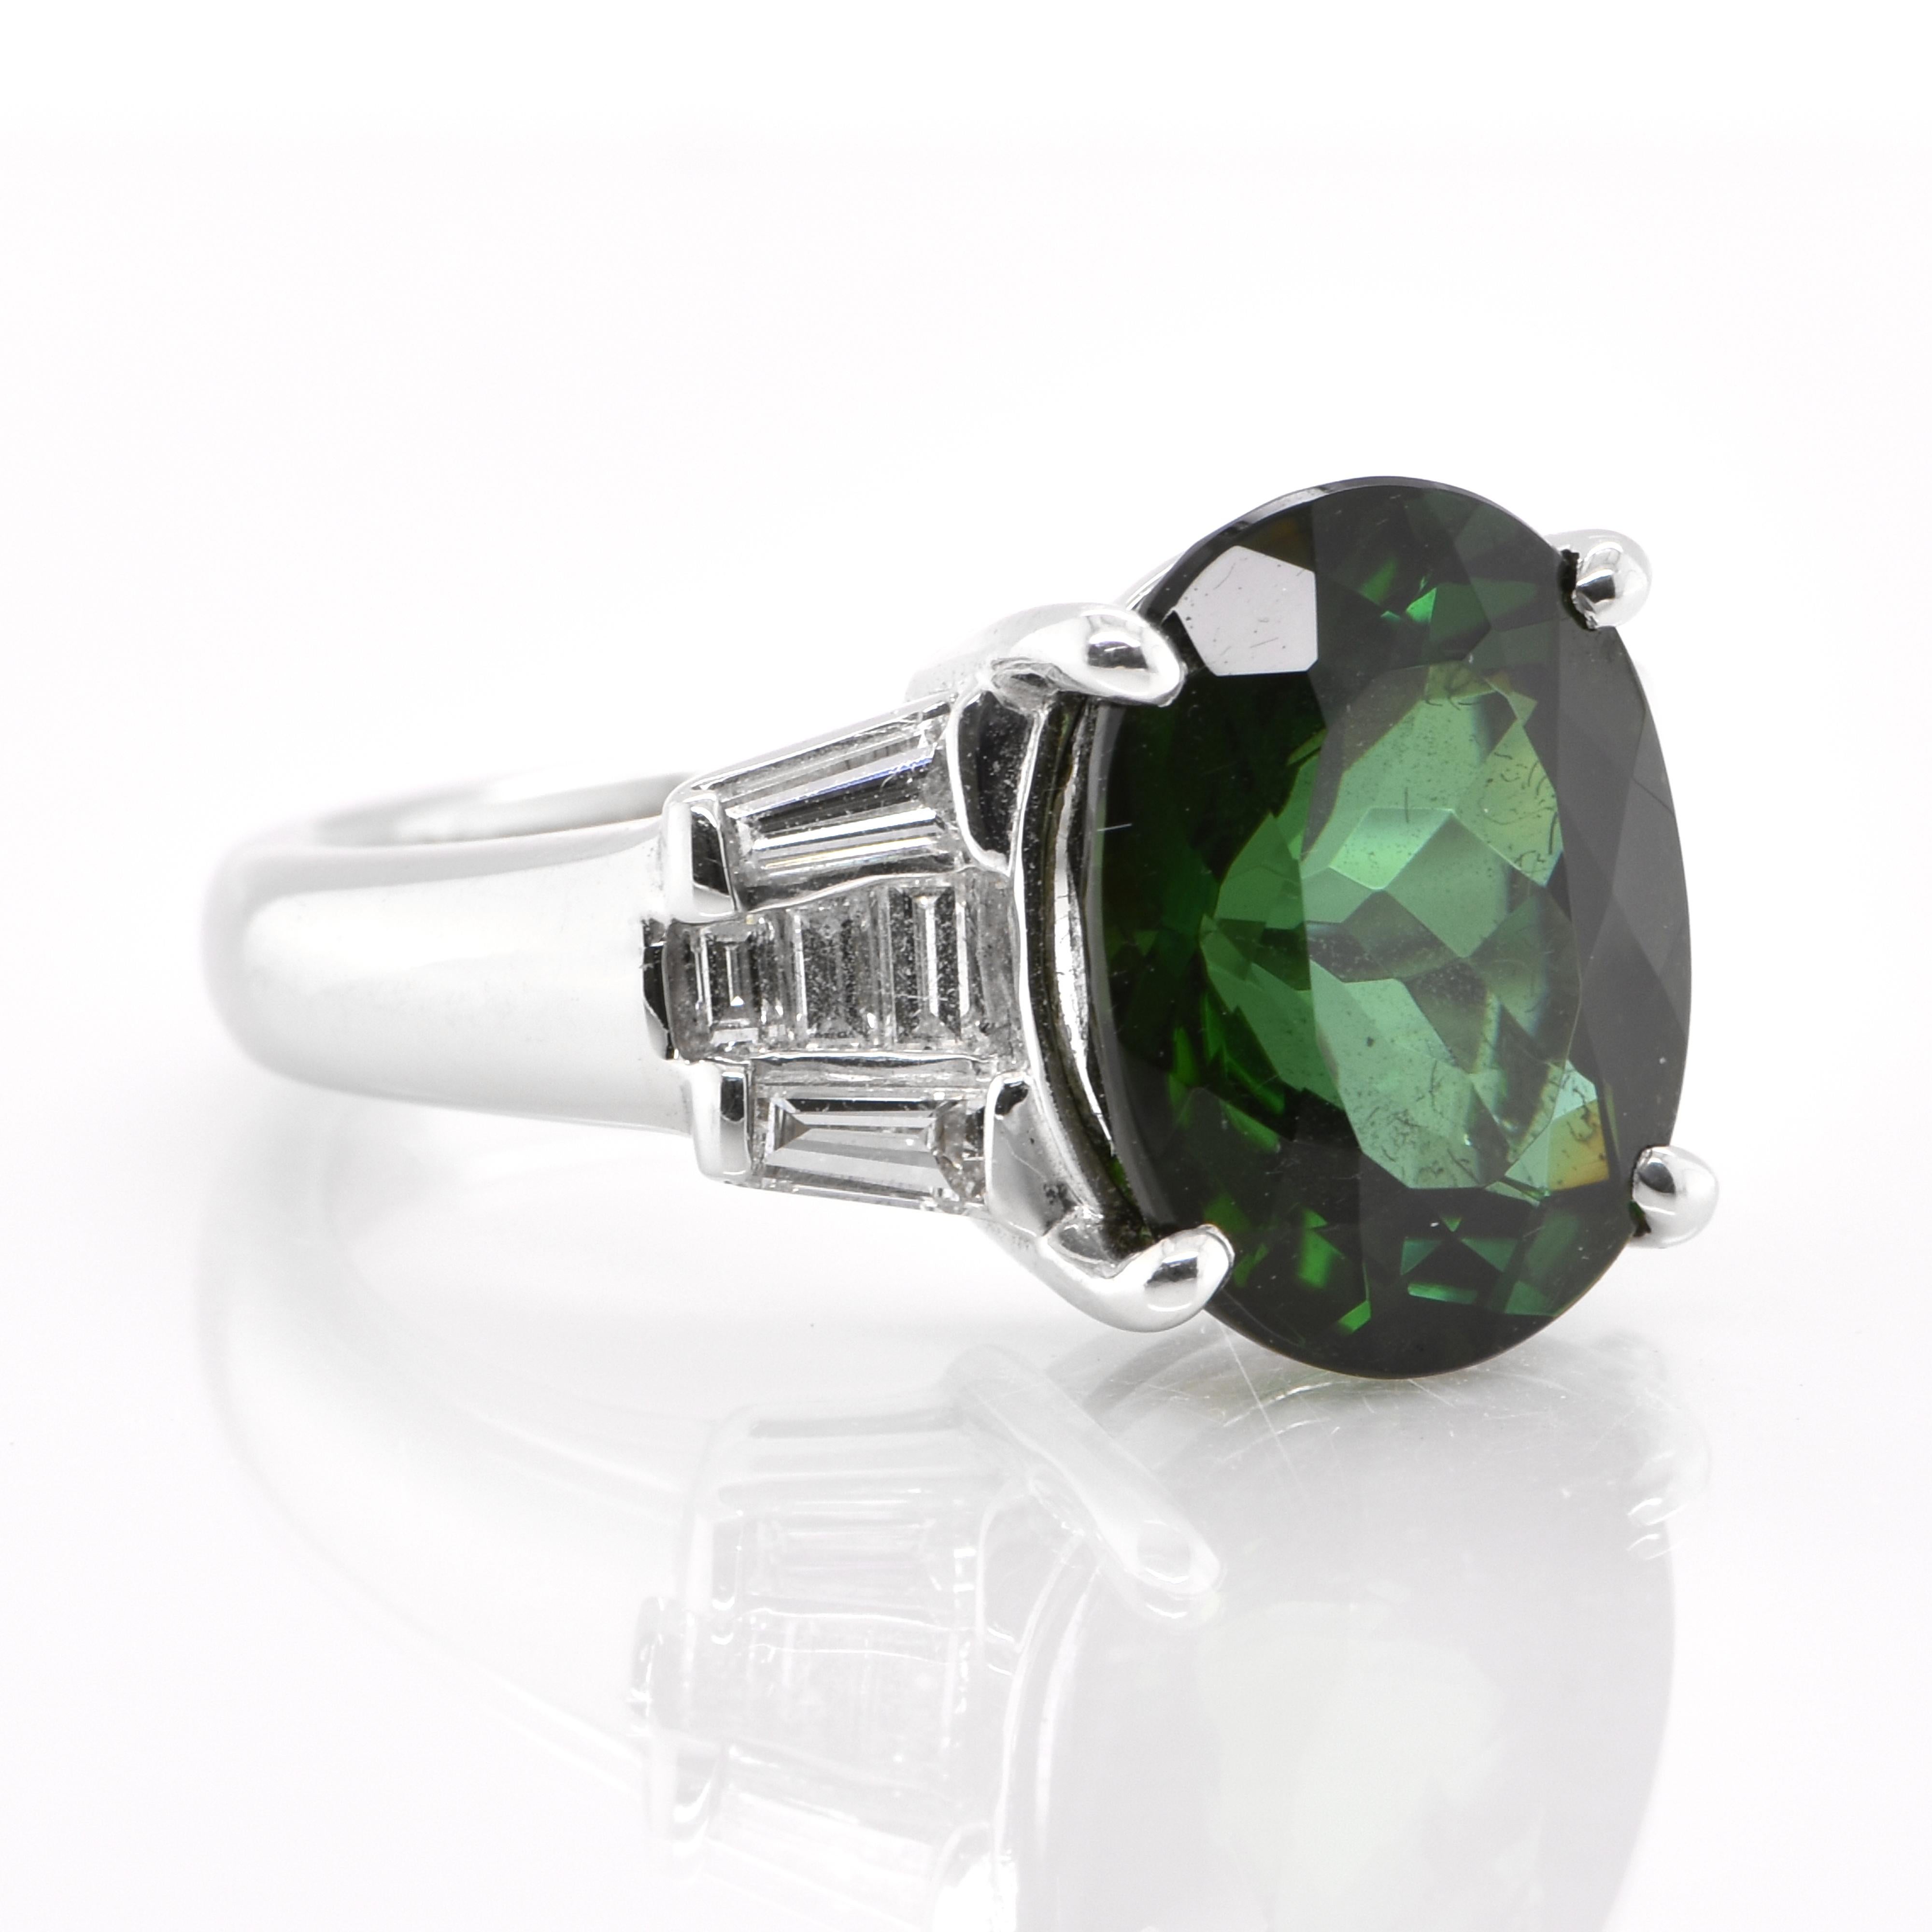 A beautiful Cocktail Ring featuring a 5.98 Carat Natural Chrome Tourmaline and 0.58 Carats of Diamond Accents set in Platinum. Tourmalines were first discovered by Spanish conquistadors in Brazil in 1500s. The name Tourmaline comes from Sinhalese